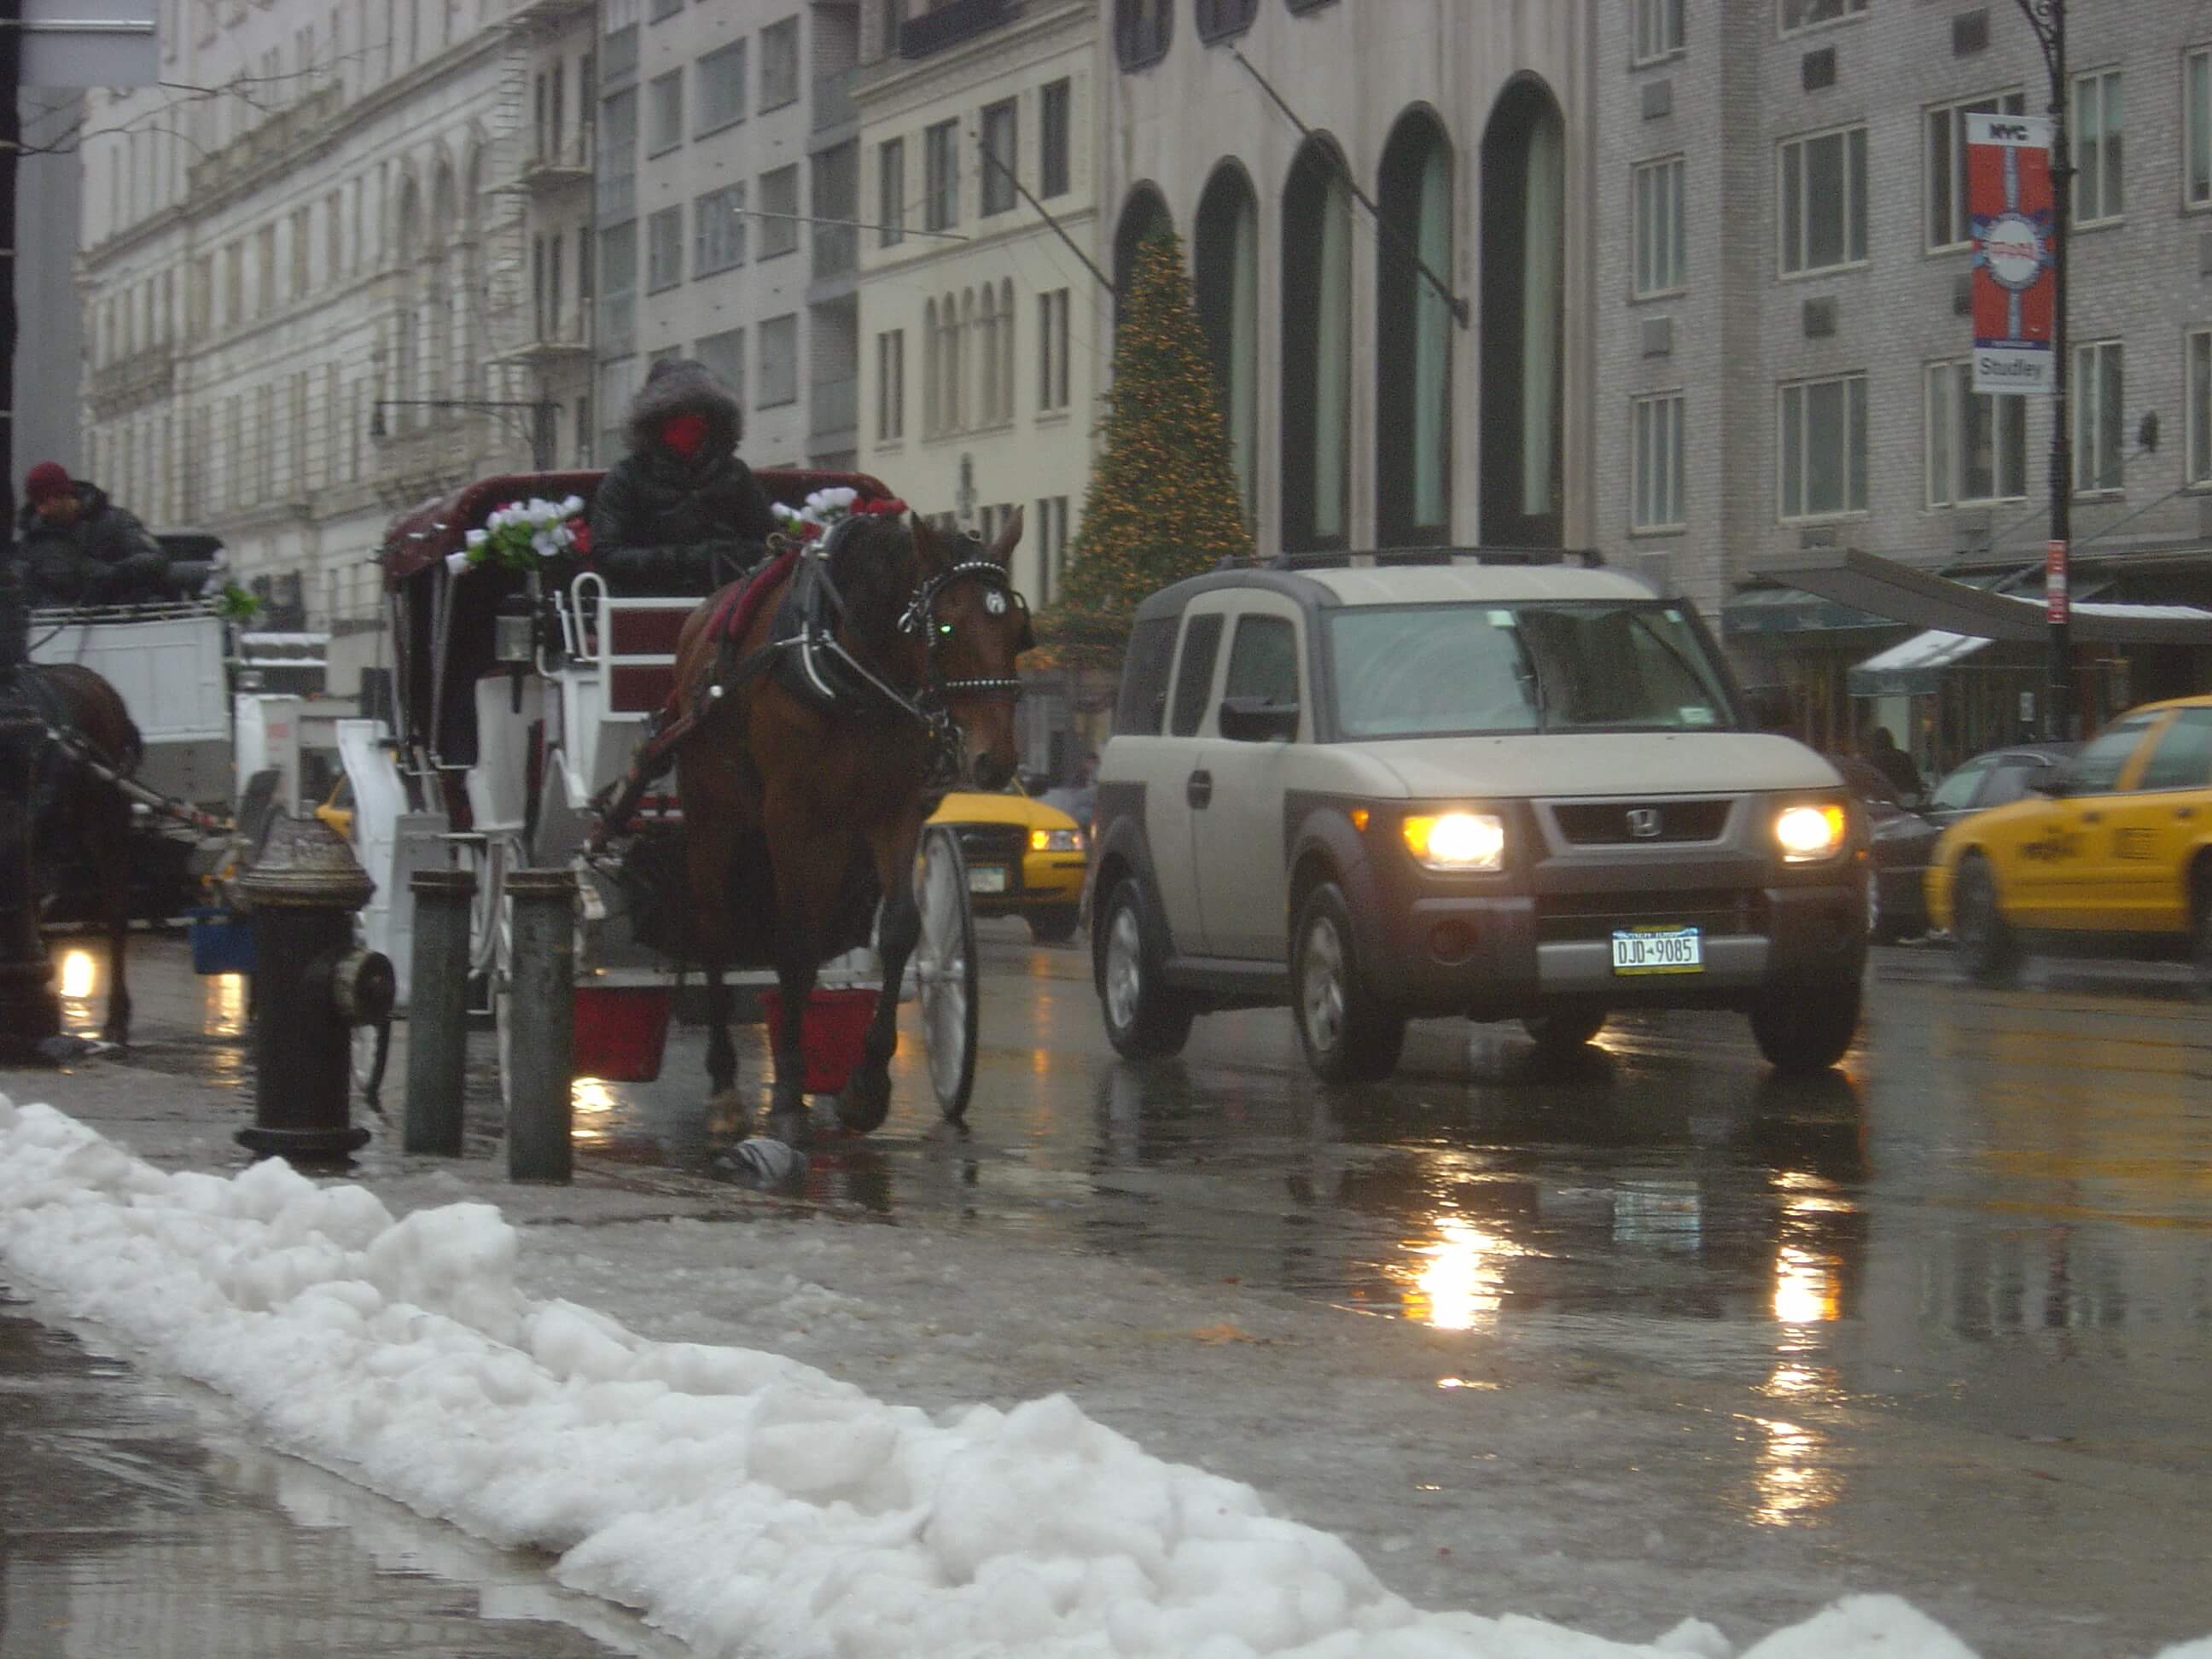 Horse Drawn Carriage on street